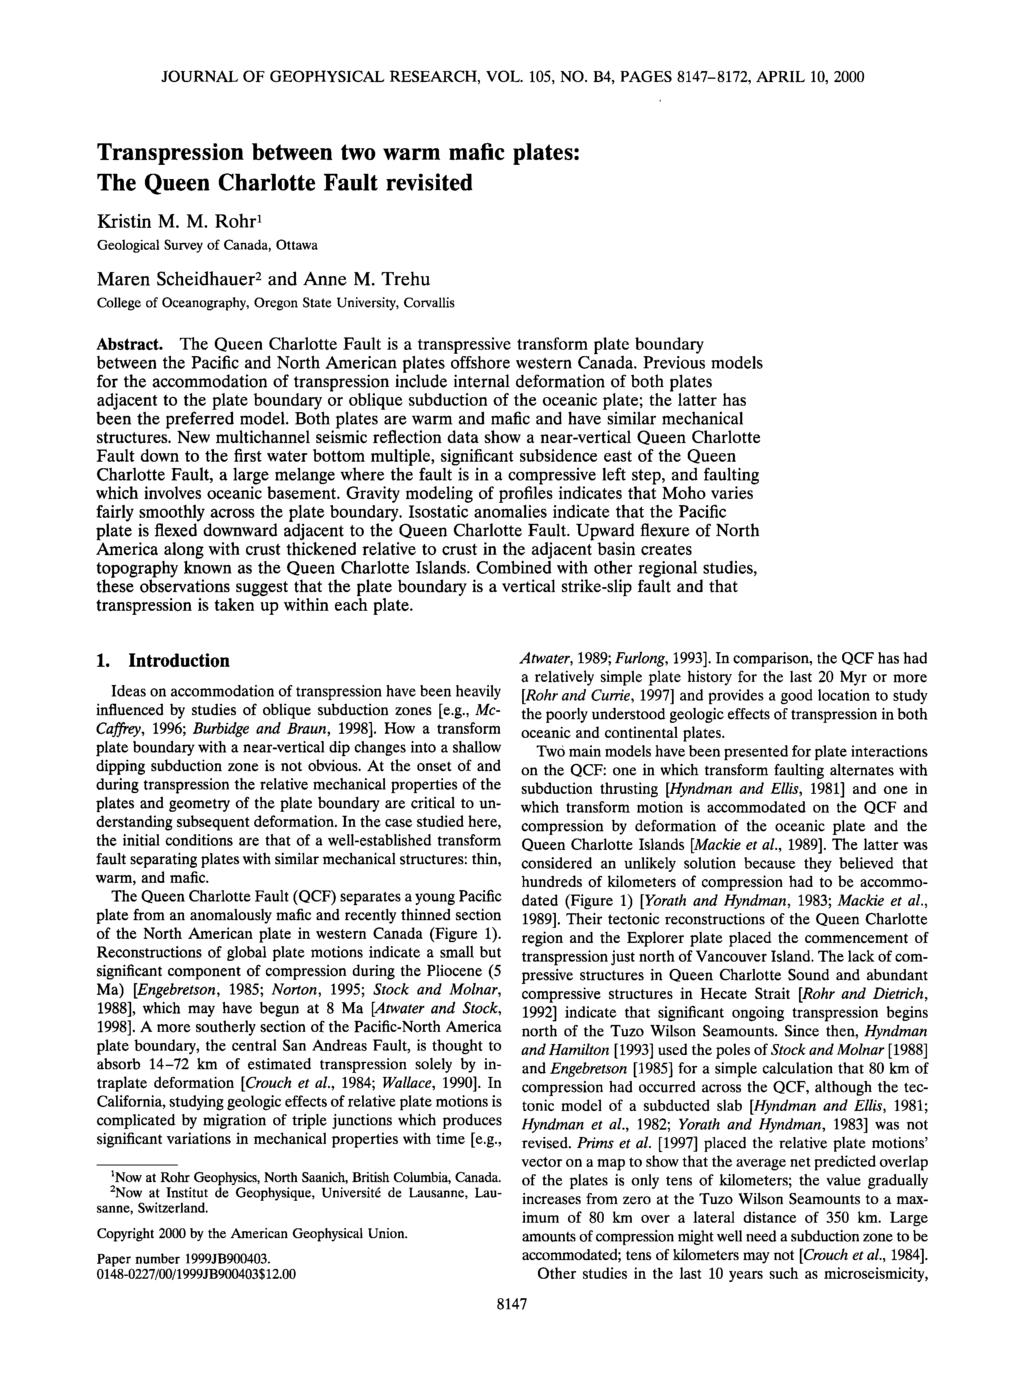 JOURNAL OF GEOPHYSICAL RESEARCH, VOL. 105, NO. B4, PAGES 8147-8172, APRIL 10, 2000 Transpressin between tw warm mafic plates: The Queen Charltte Fault revisited Kristin M.